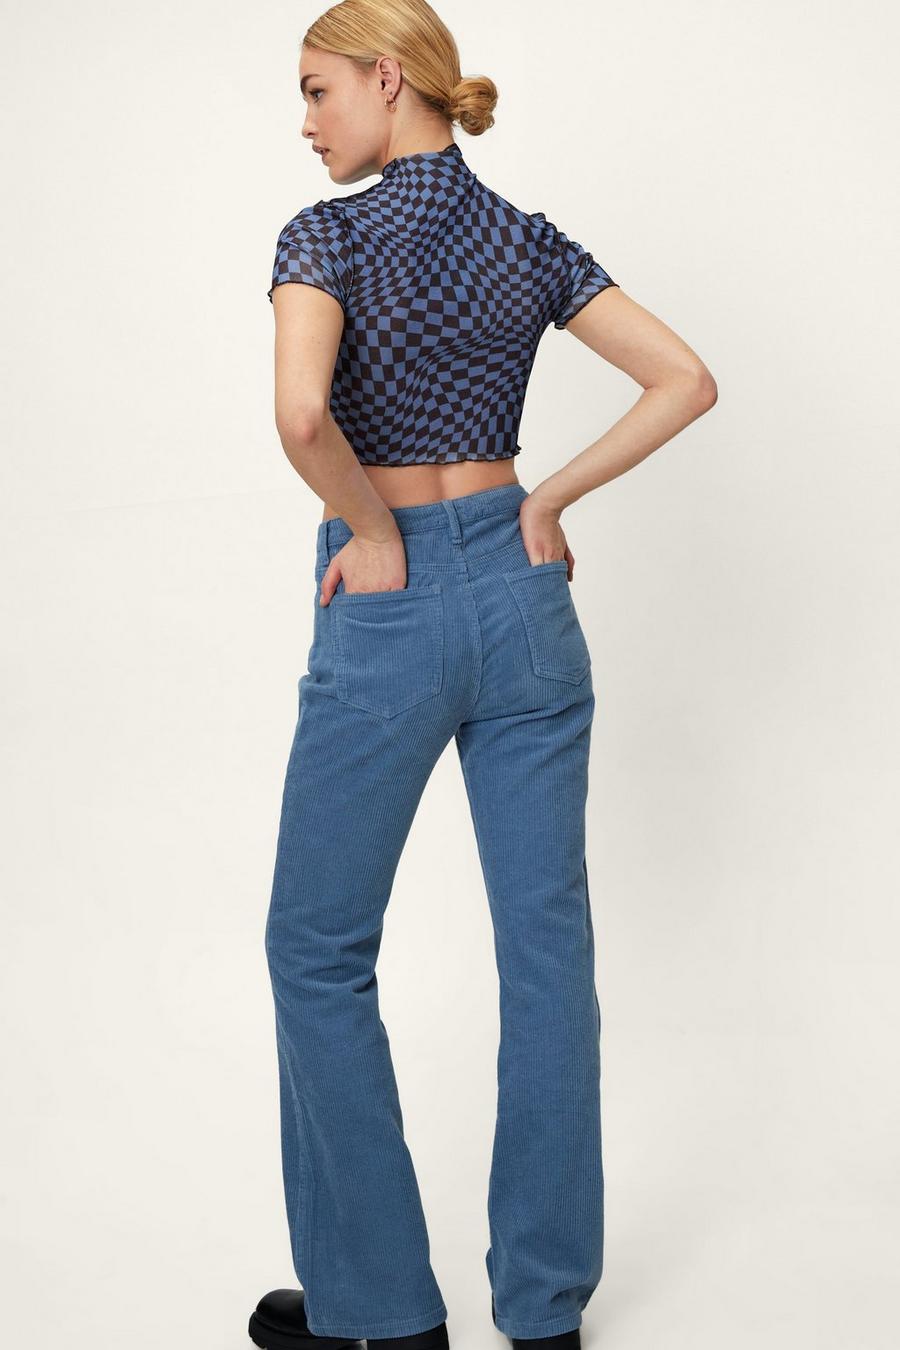 Corduroy Fit and Flare High Waisted Trousers